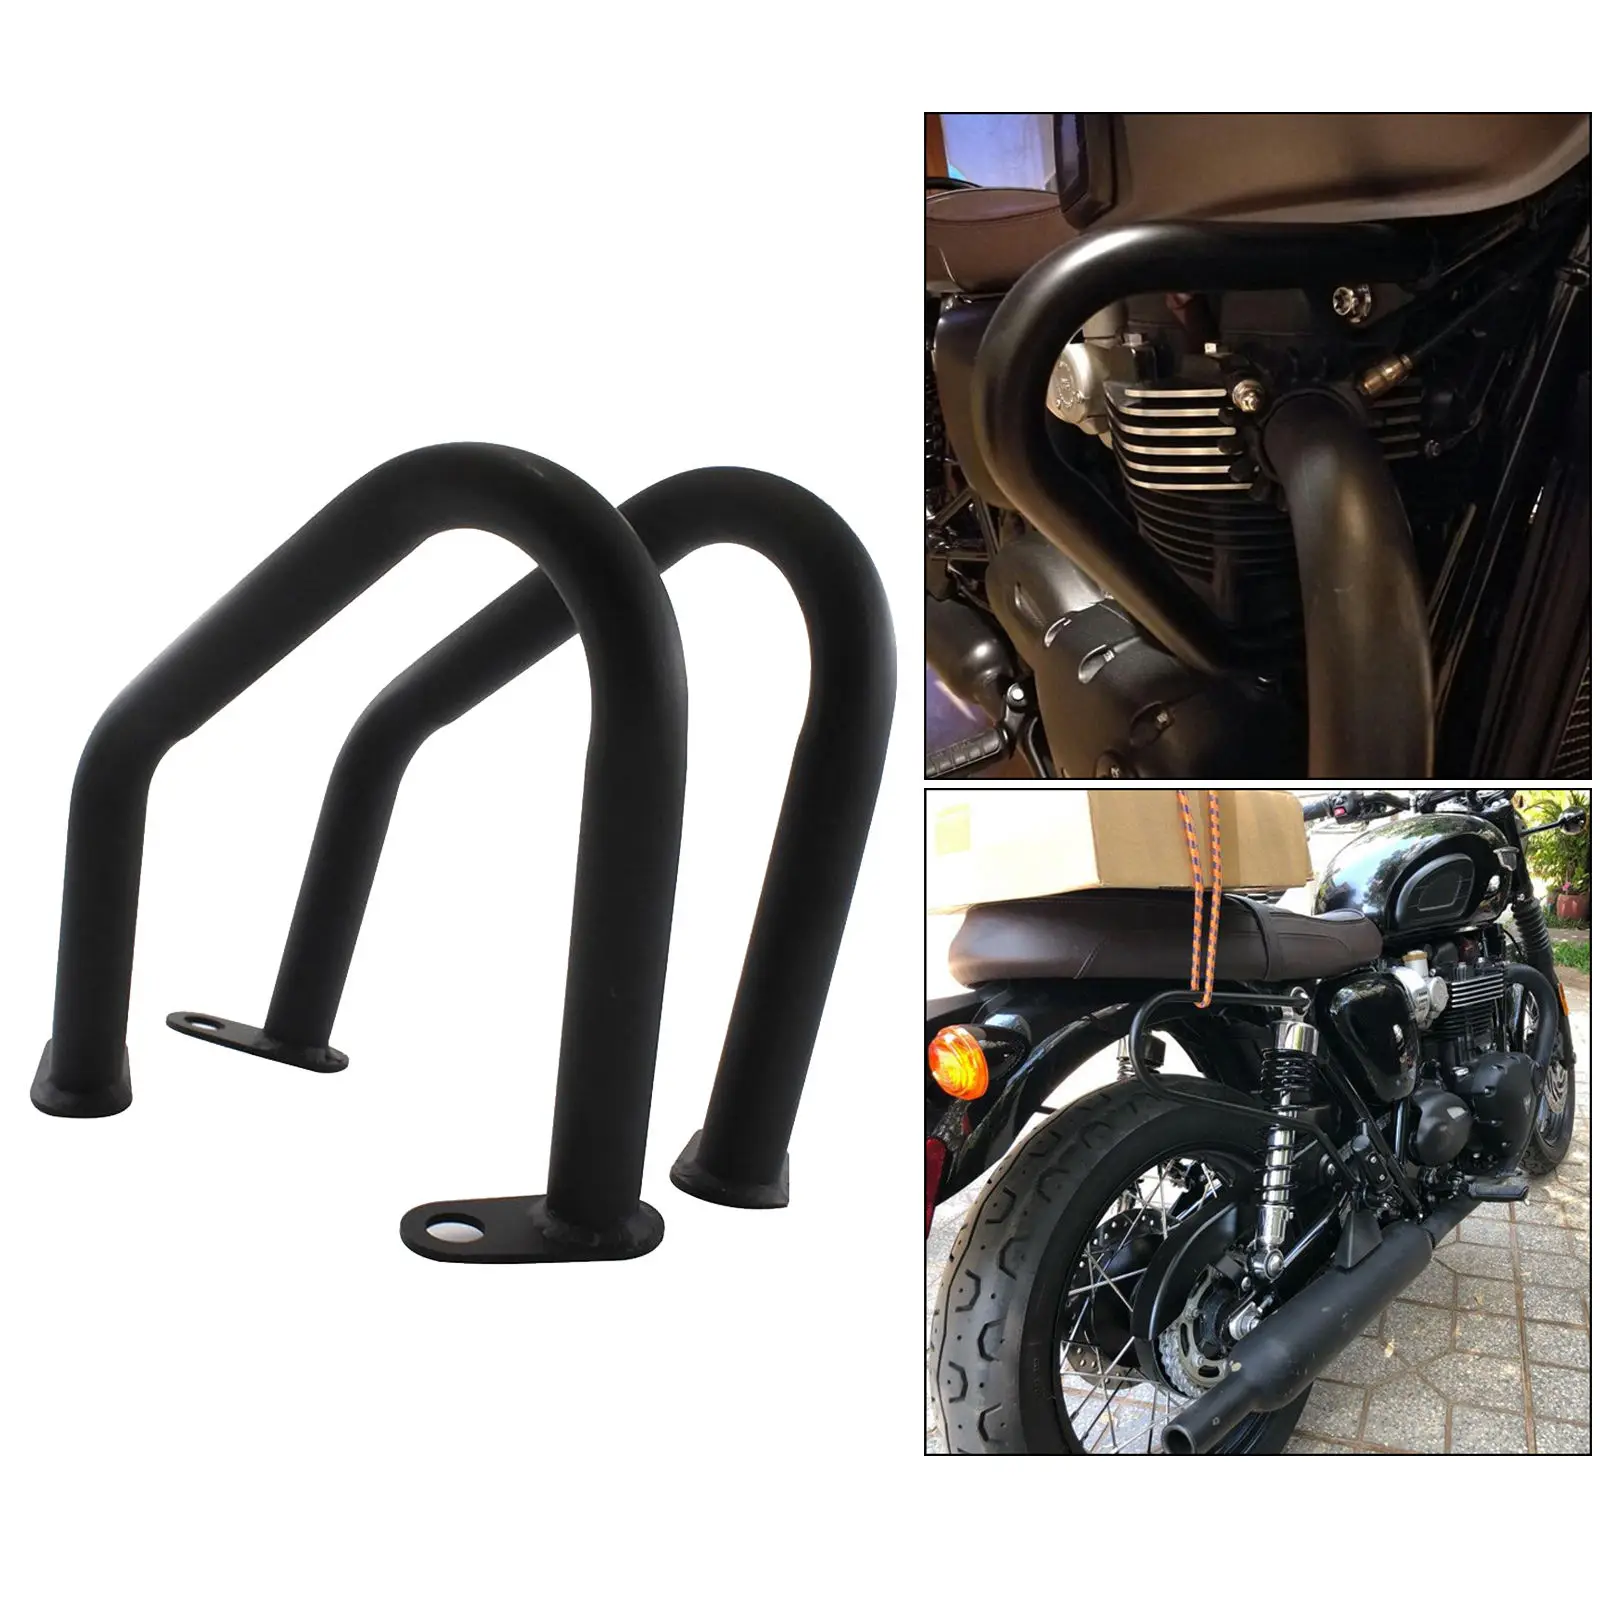 2x Black Motorcycle Engine Guard Protector Crash Bars Replacement For  Thruxton 1200 2016-2019